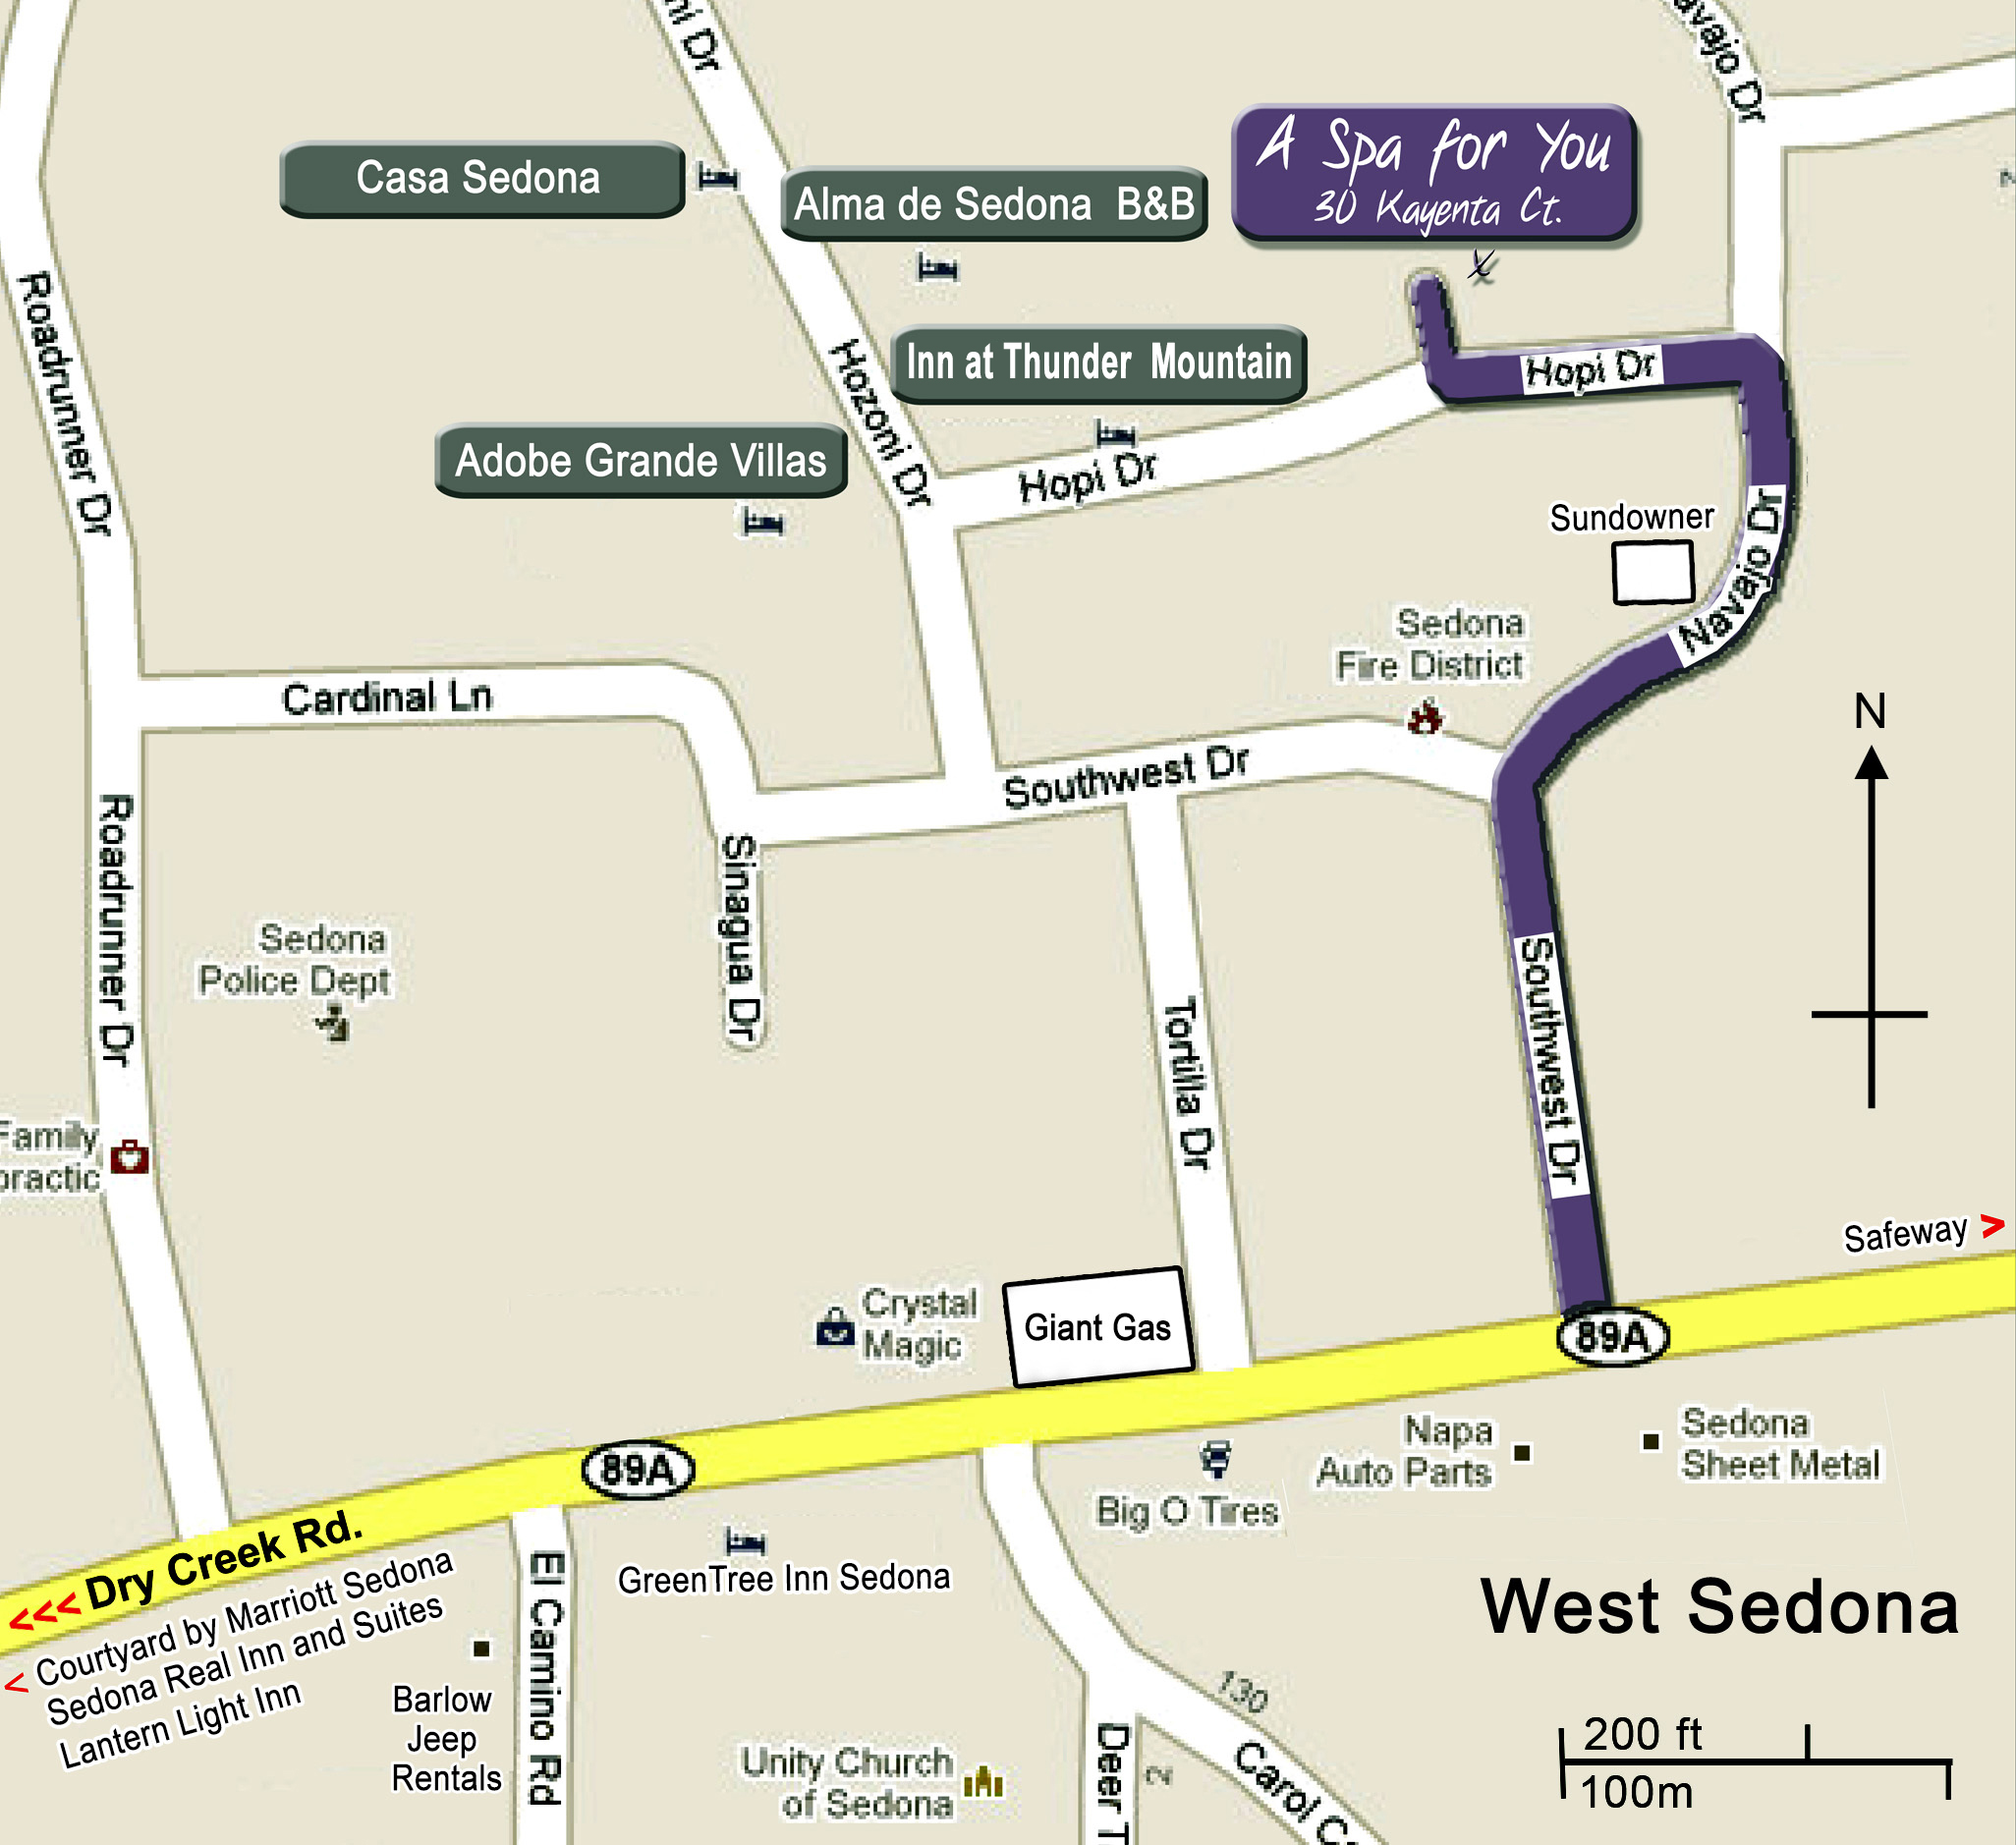 A Spa For You Sedona Day Spa & Massage last 1/4 mile Map - Click for Google Map Link